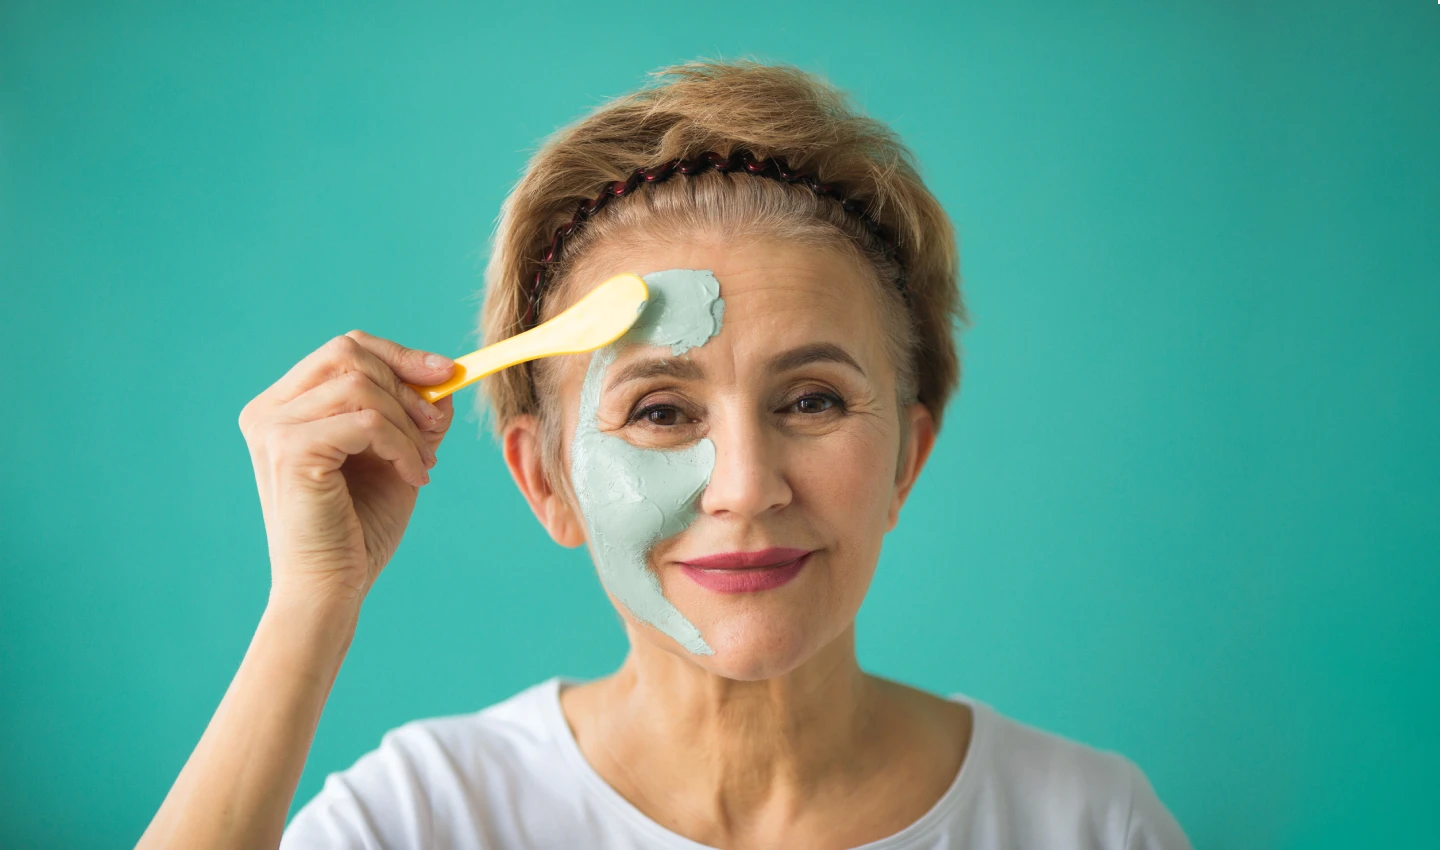 An old woman with hydrated skin applying a hydrating mask. The image showcases the power of hydrating masks for nourished skin.